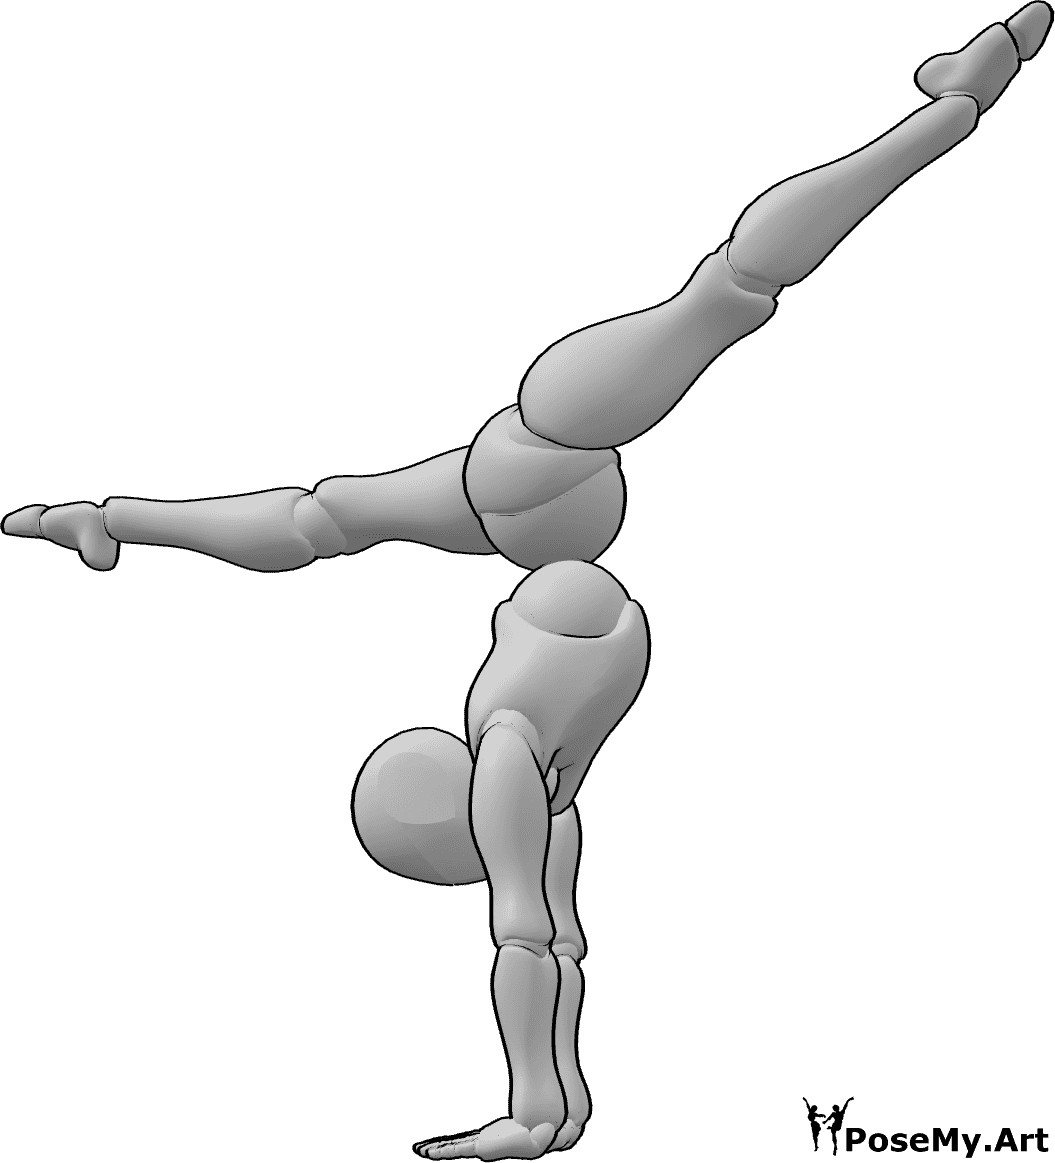 Pose Reference- Handstand front split pose - Female is standing on her hands and doing a front split